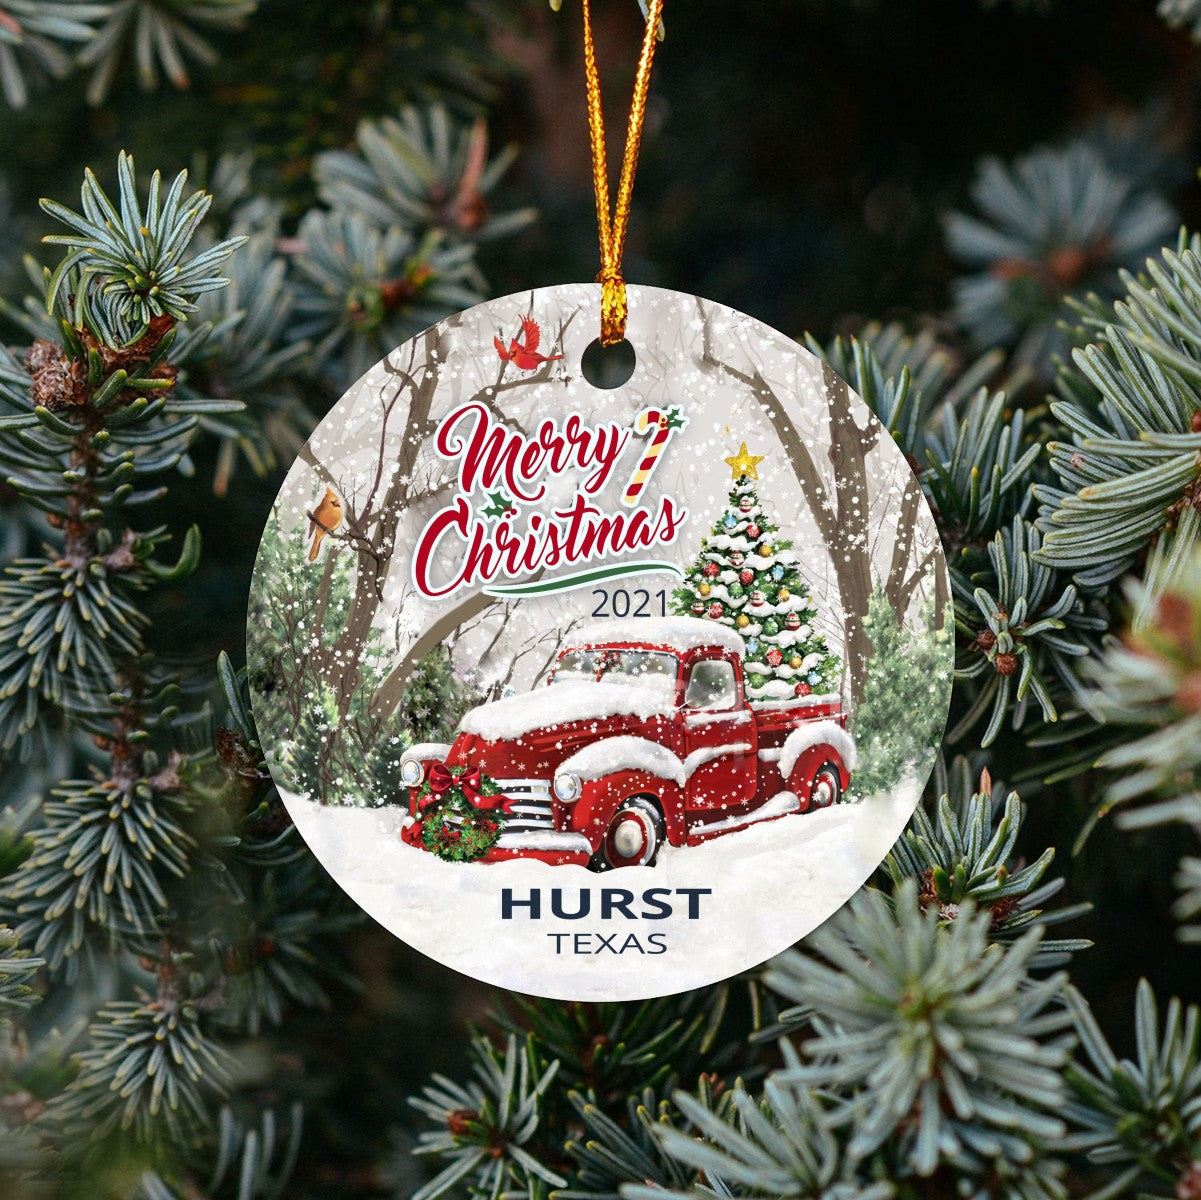 Christmas Tree Ornaments Hurst - Ornament Customize With Name City And State Hurst Texas TX - Red Truck Xmas Ornaments 3'' Plastic Gift For Family, Friend And Housewarming